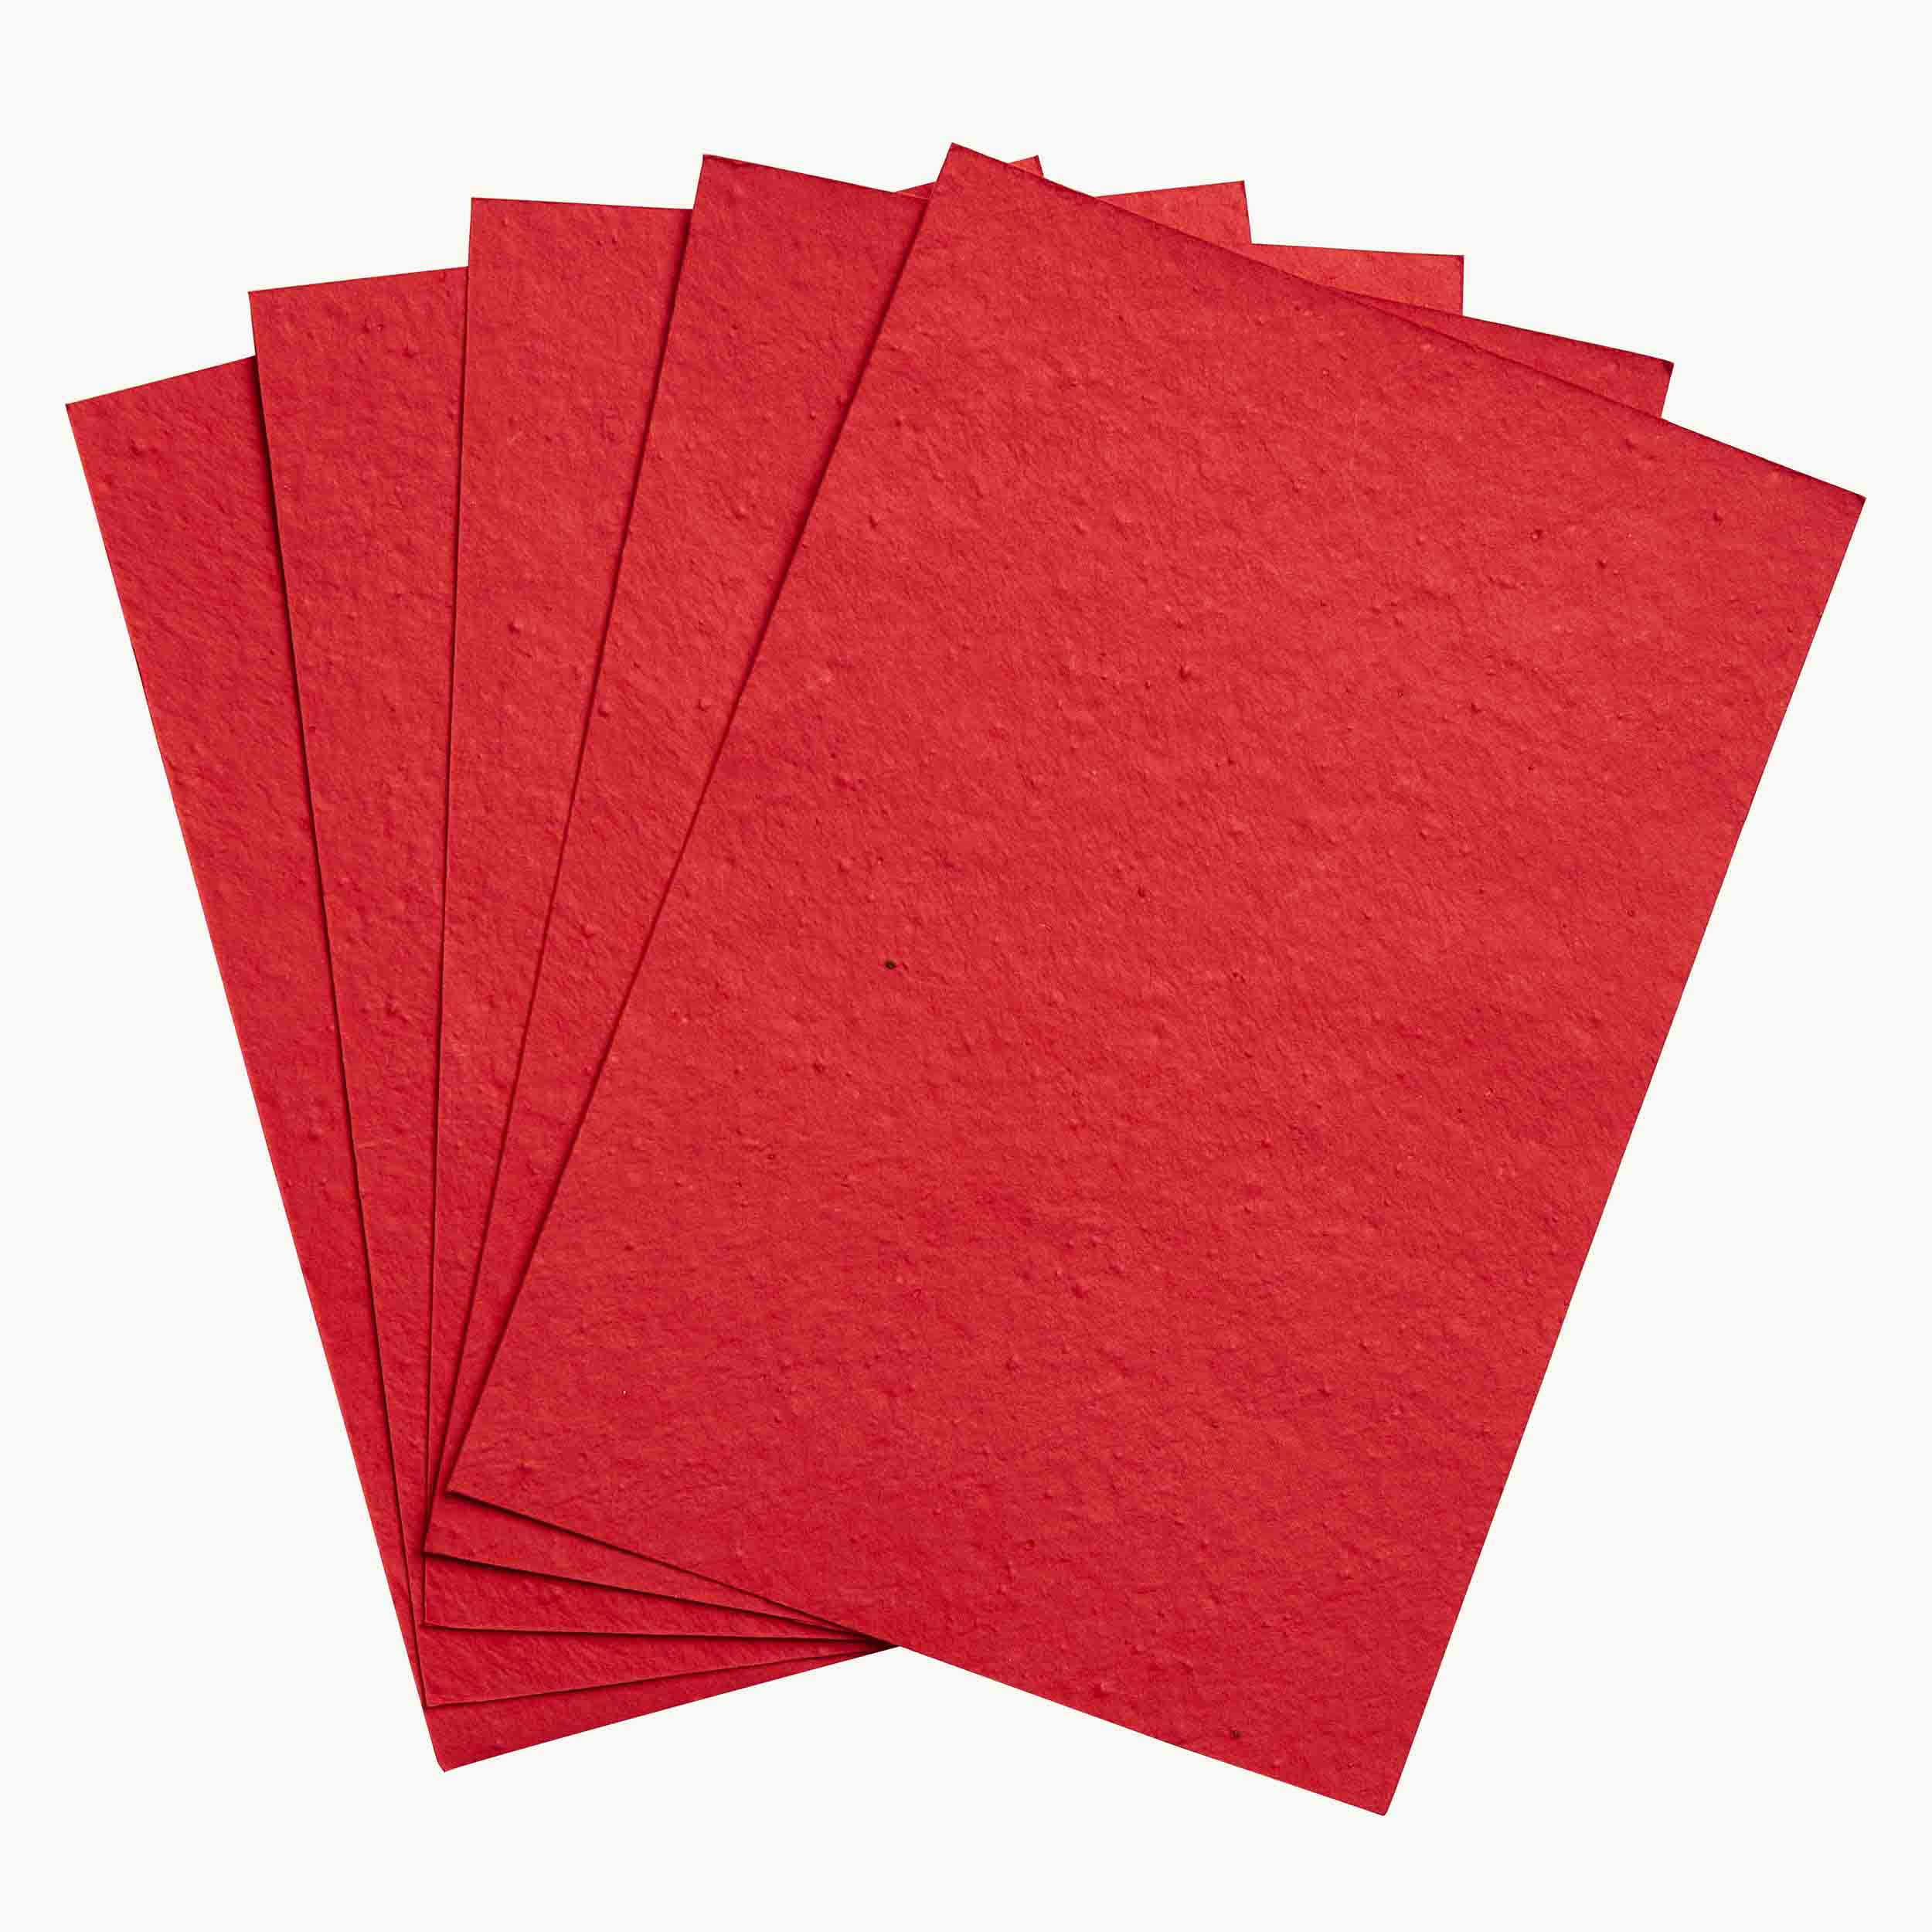 Drawing Paper make of 100% Cotton Linter | SEED PAPER INDIA